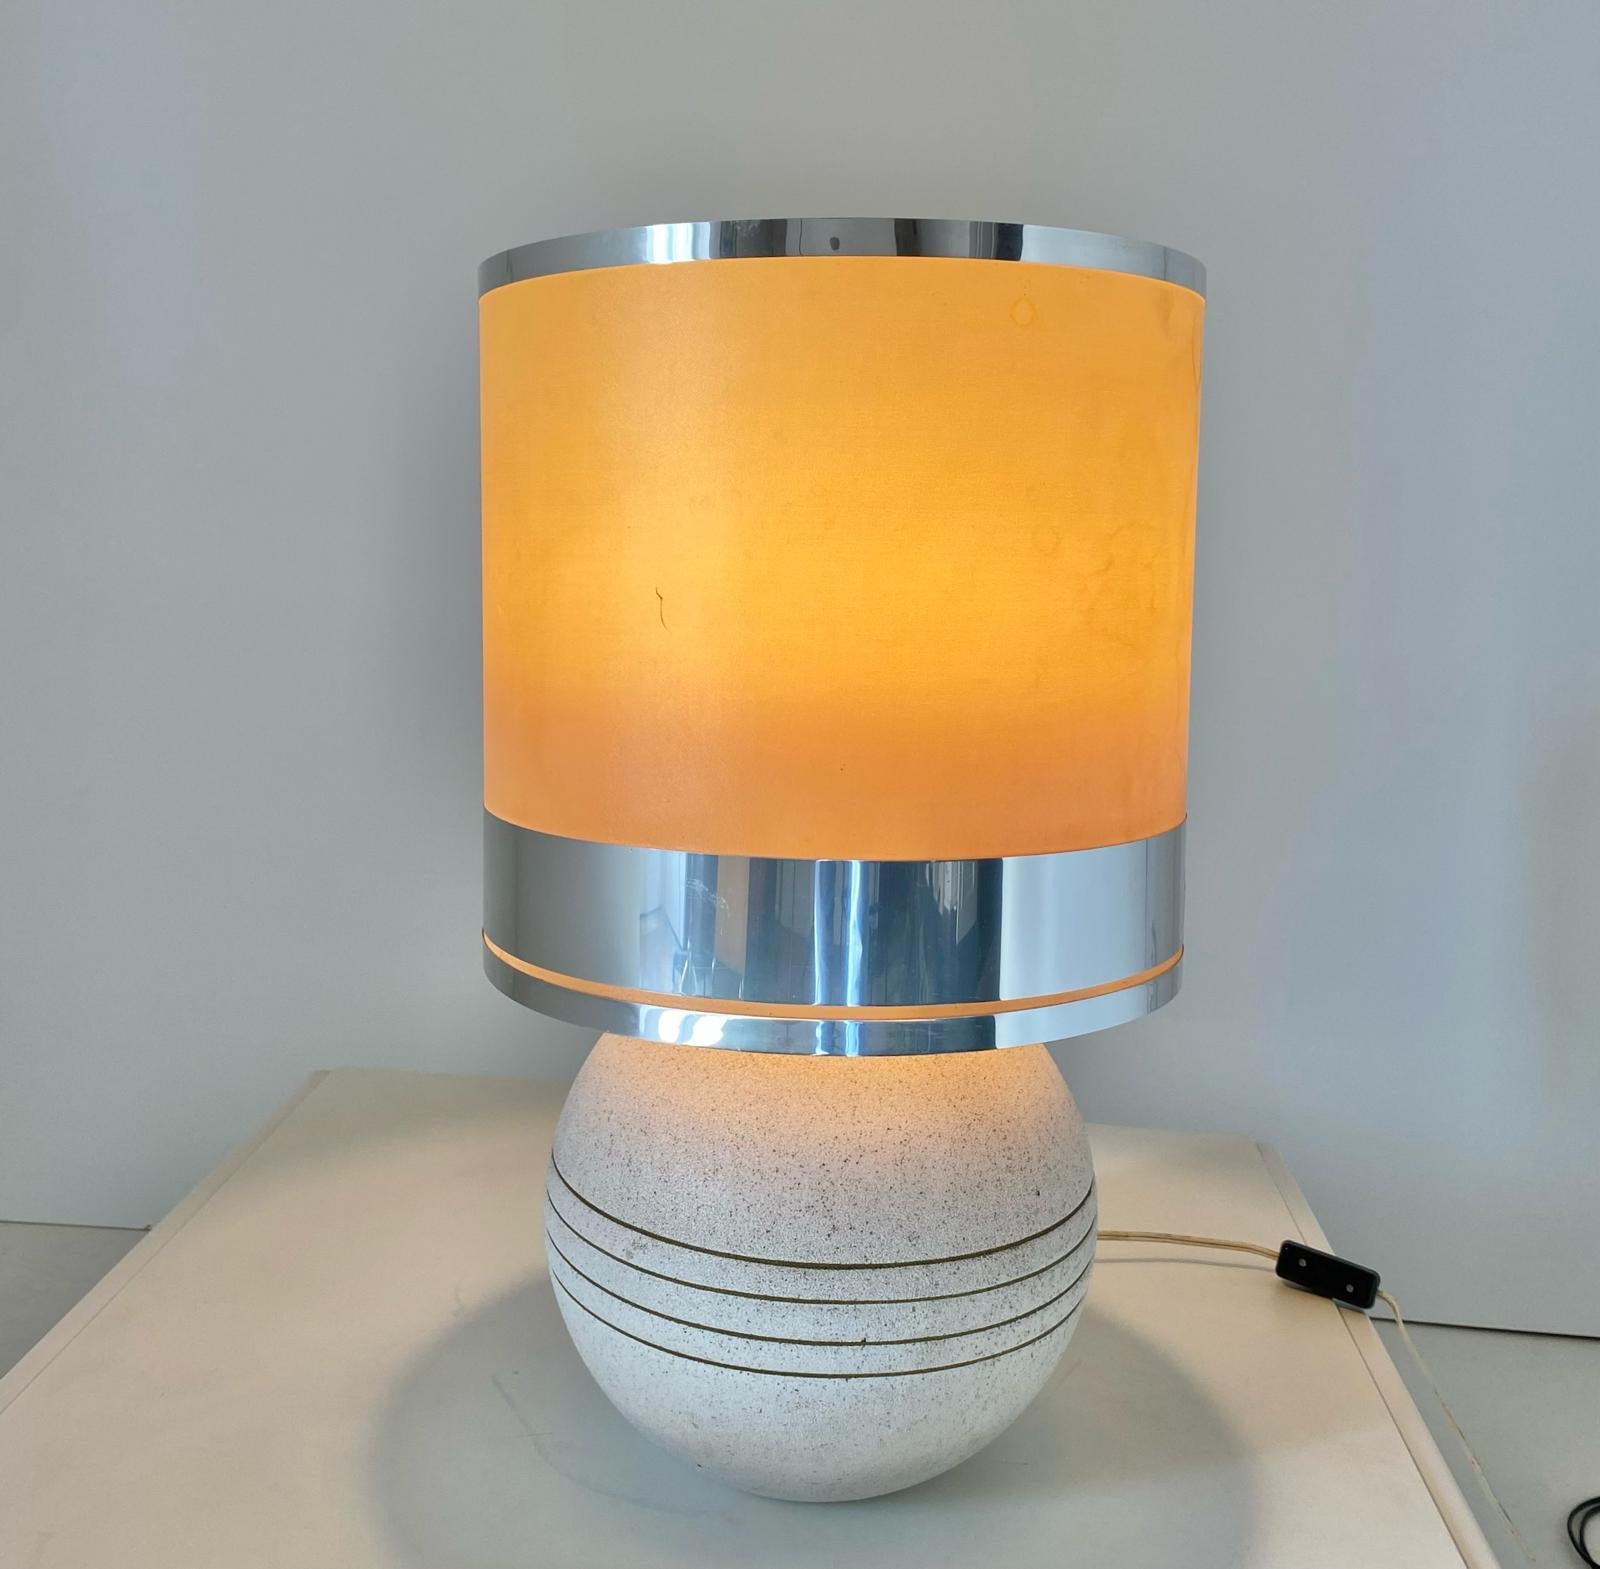 1970s viintage ceramic table lamp attributed to Reggiani manufacturer, Italy. In very good condtions with signs of time on the lampshade (see pic).

Please visit our profile page to check our constantly updated 200+ original vintage collection (and